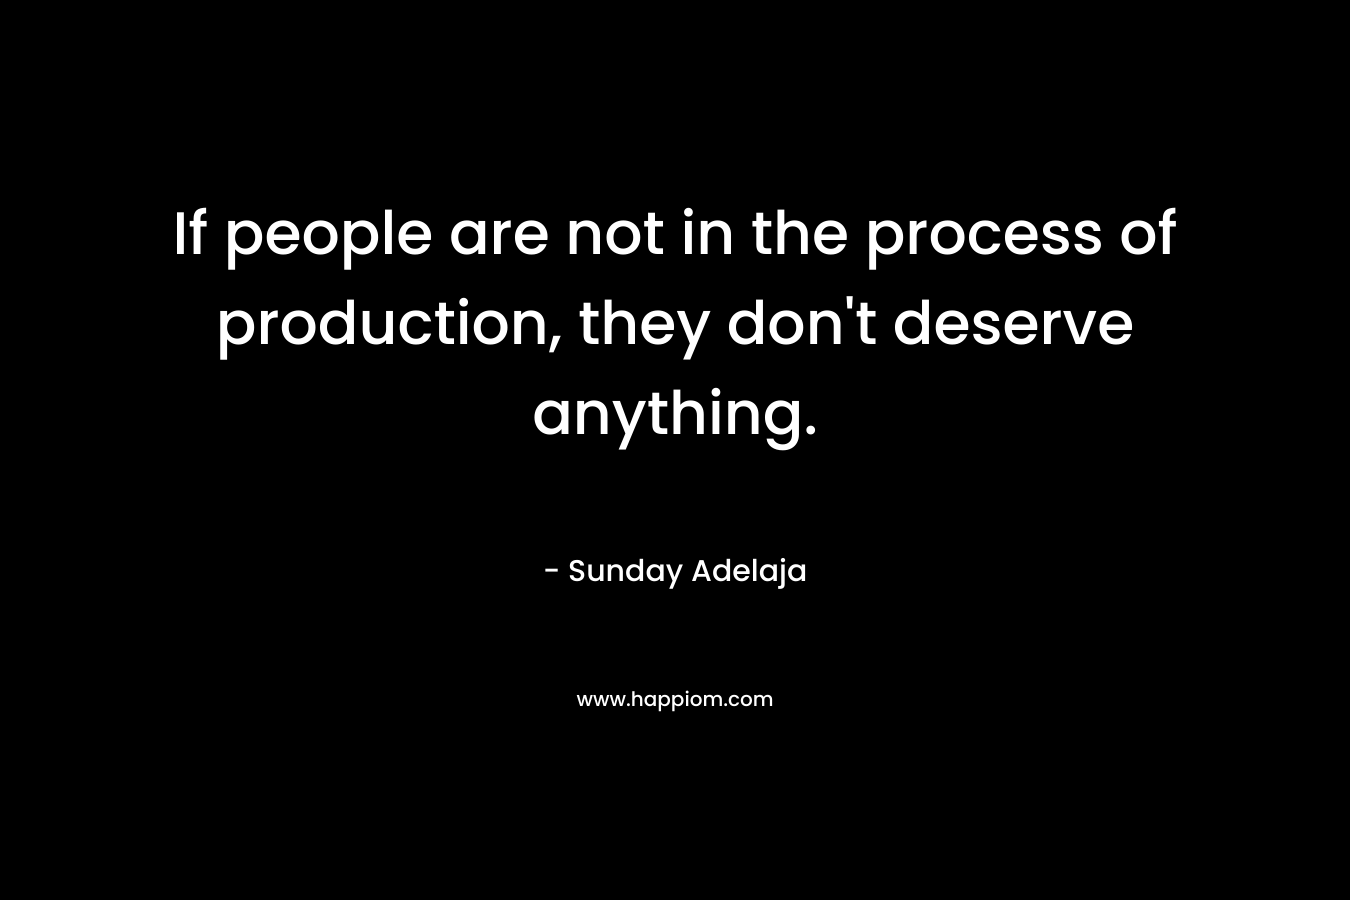 If people are not in the process of production, they don’t deserve anything. – Sunday Adelaja